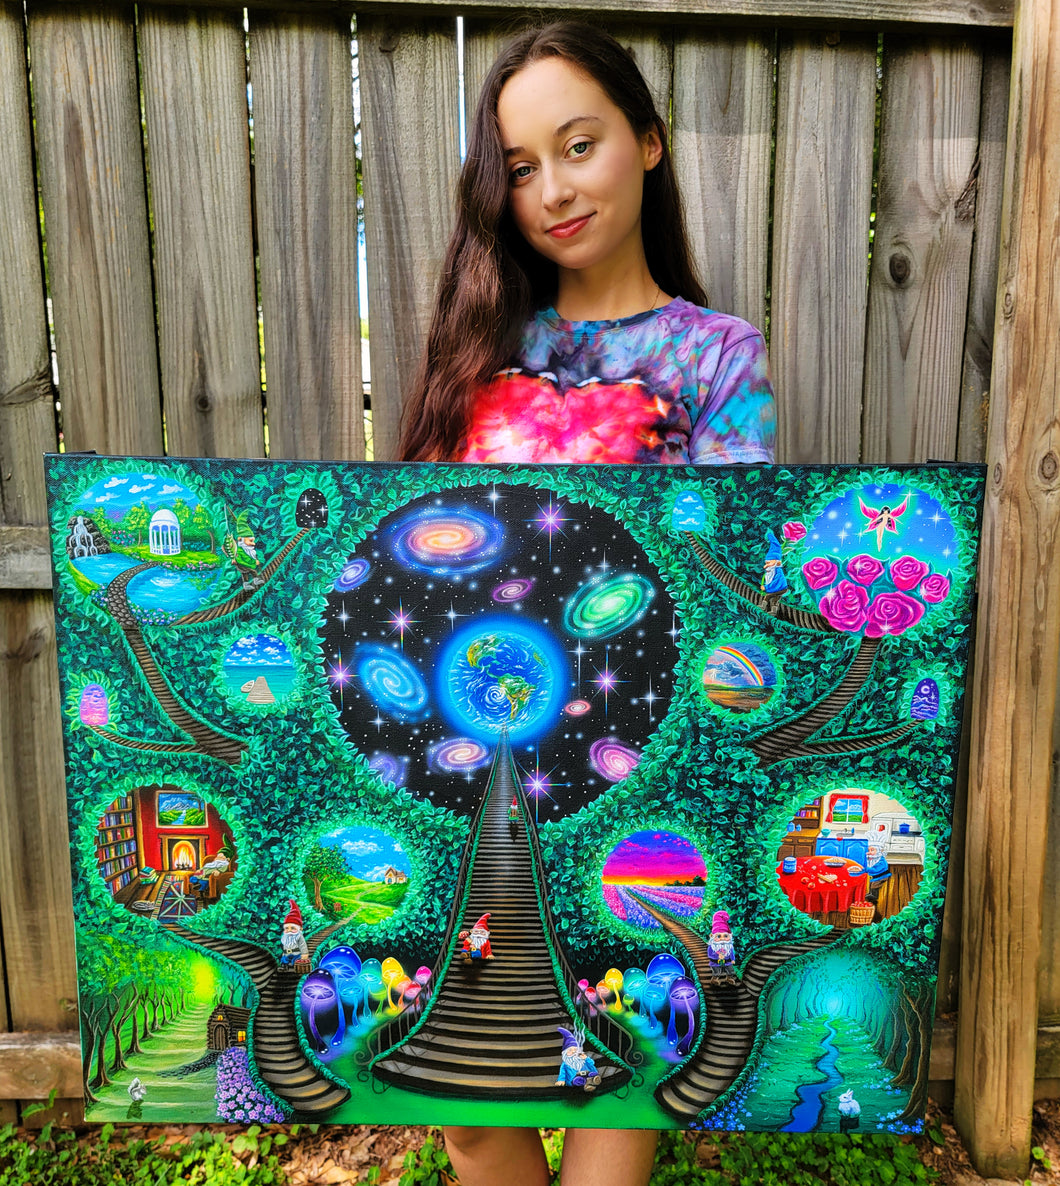 The Fantastical Forest Original Painting